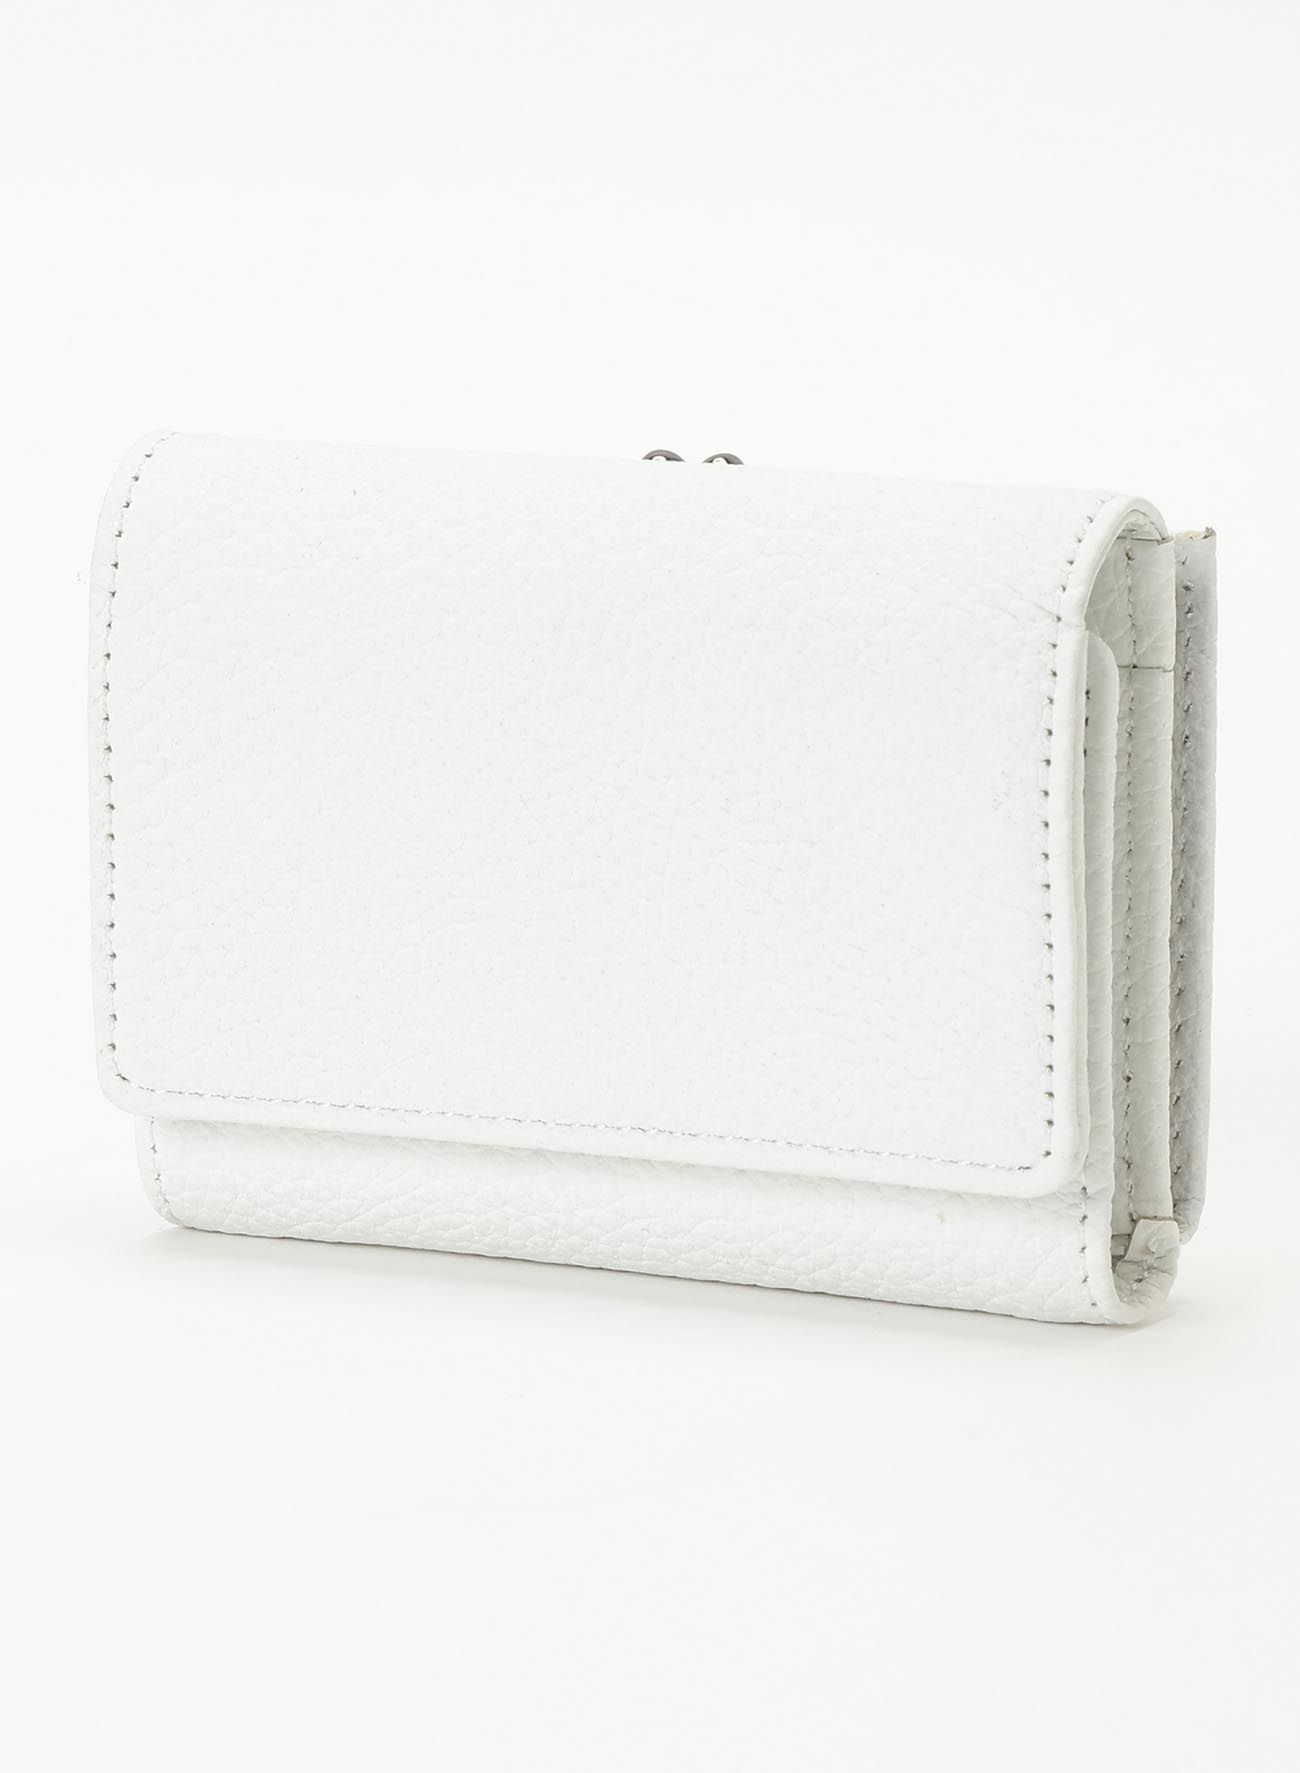 Clasp trifold wallet